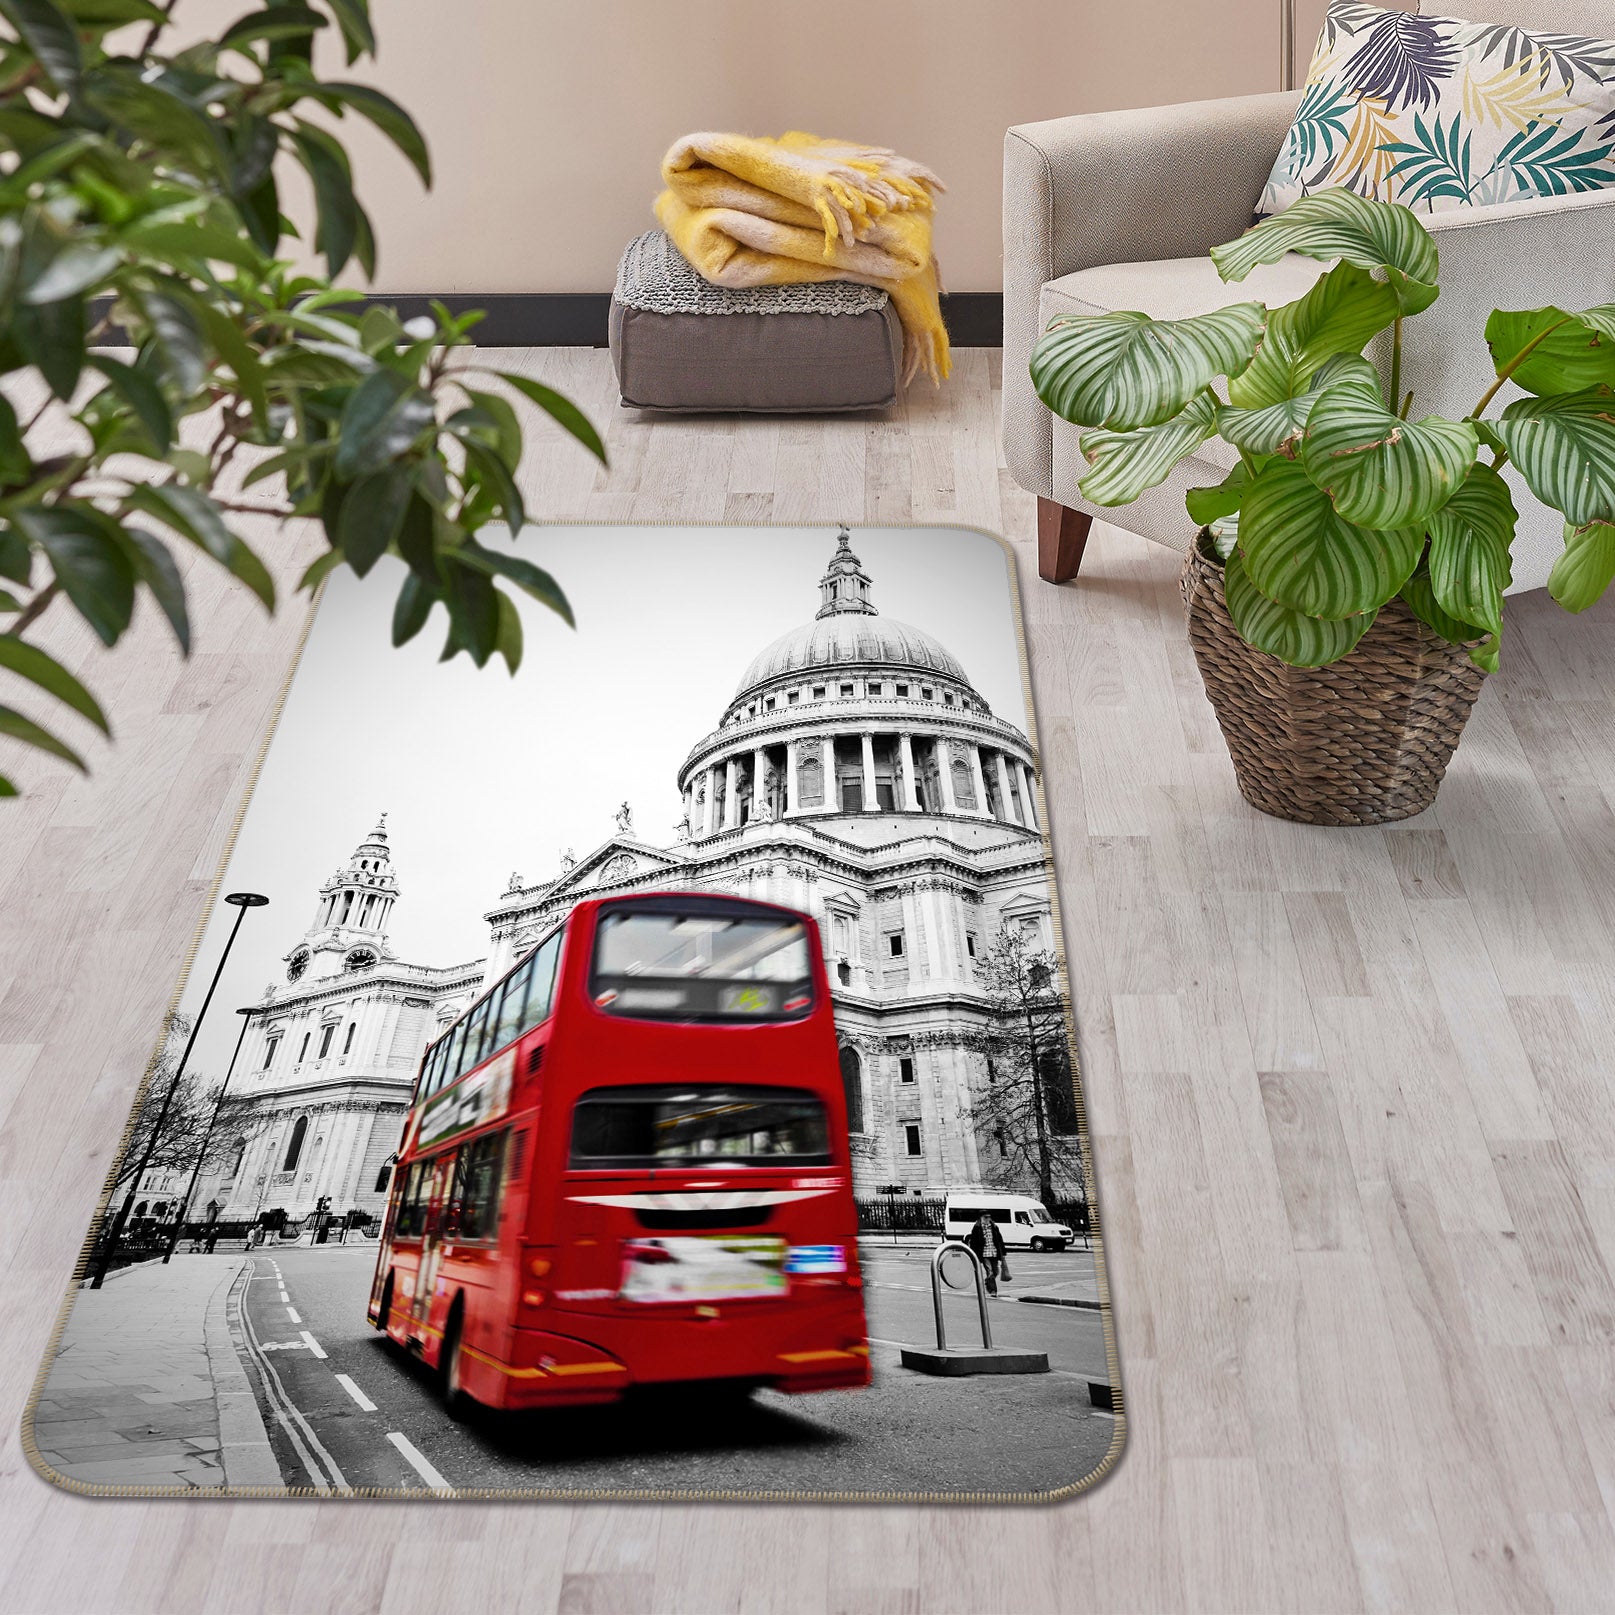 3D Building Red Bus 68138 Vehicle Non Slip Rug Mat